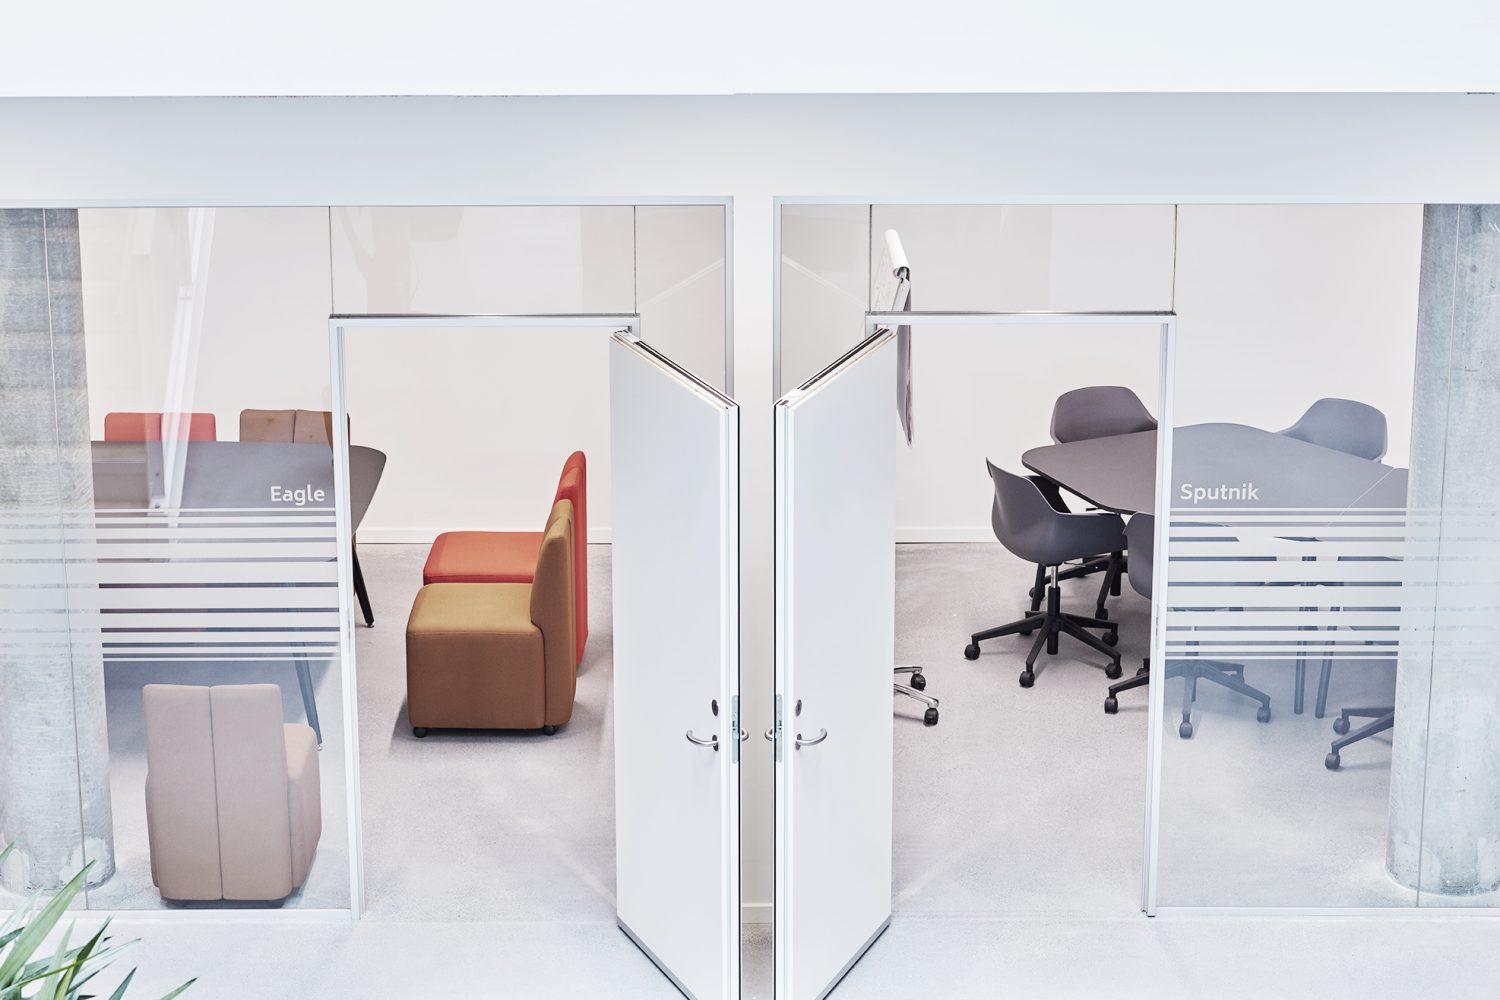 A glass door opens into a conference room.